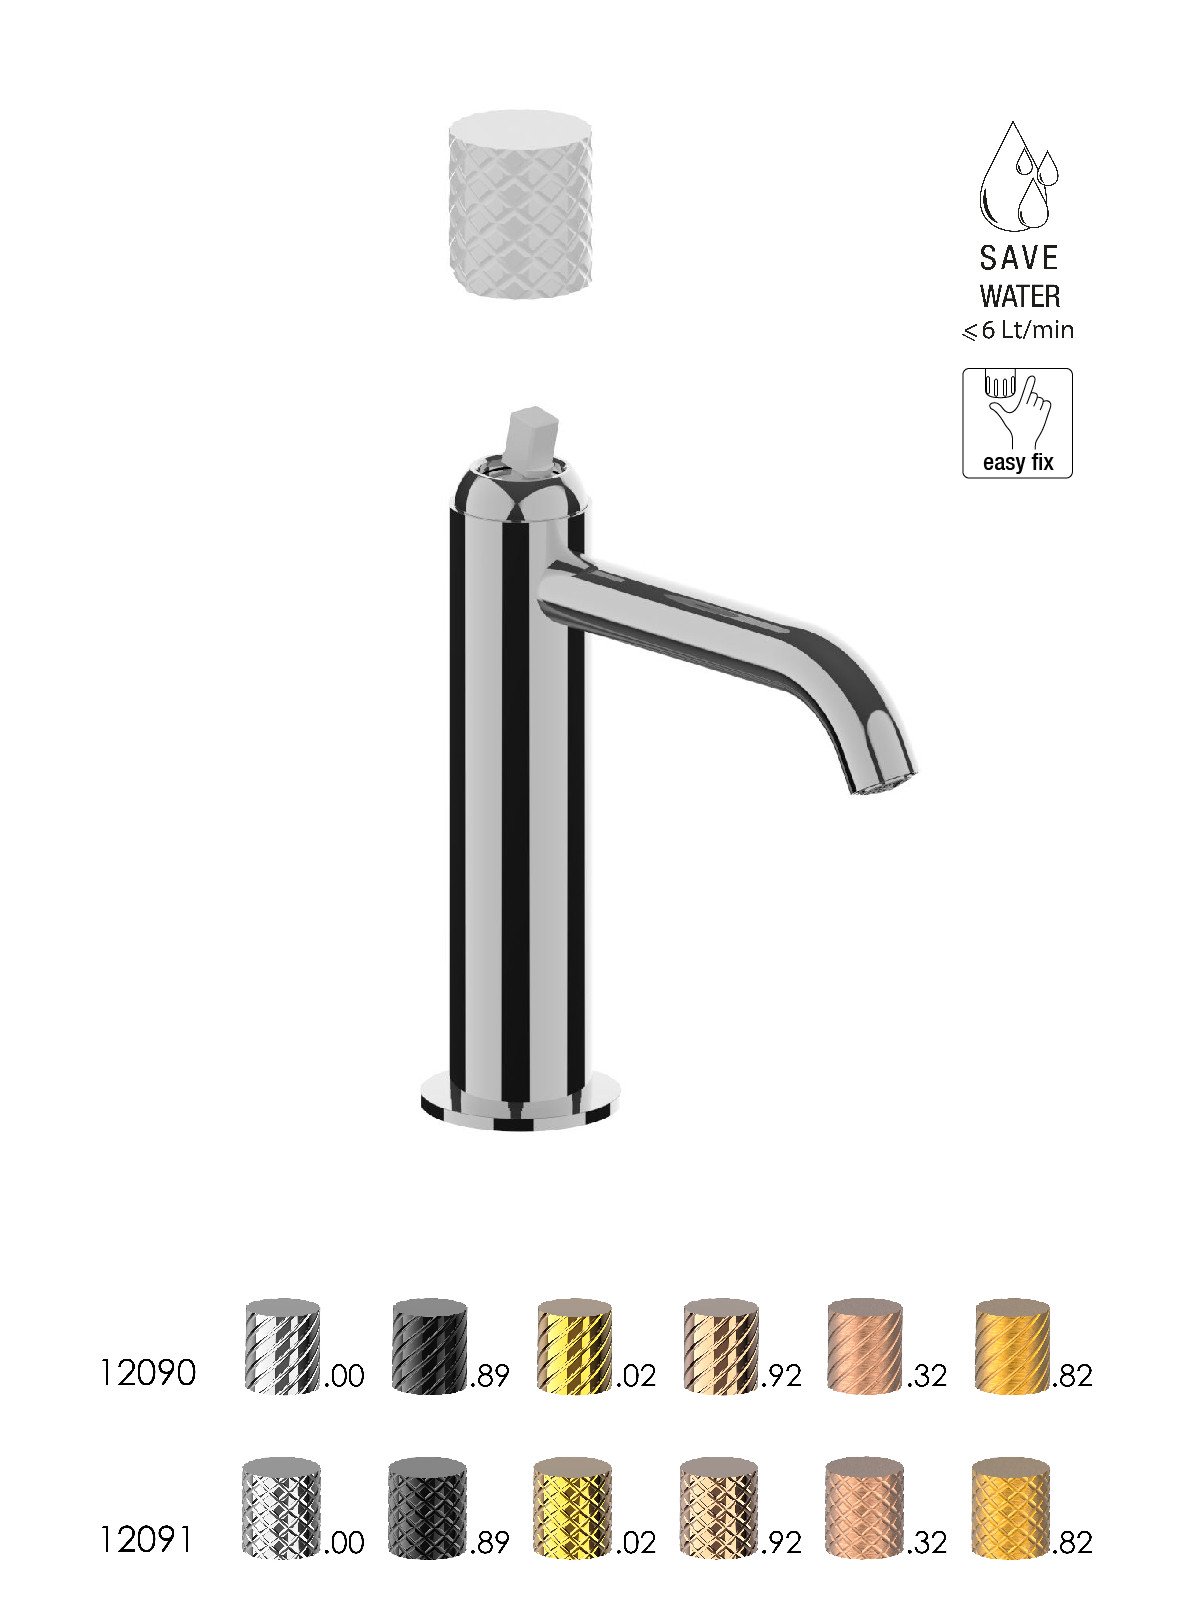 Single-lever washbasin mixer with 1-1/4pop-up waste